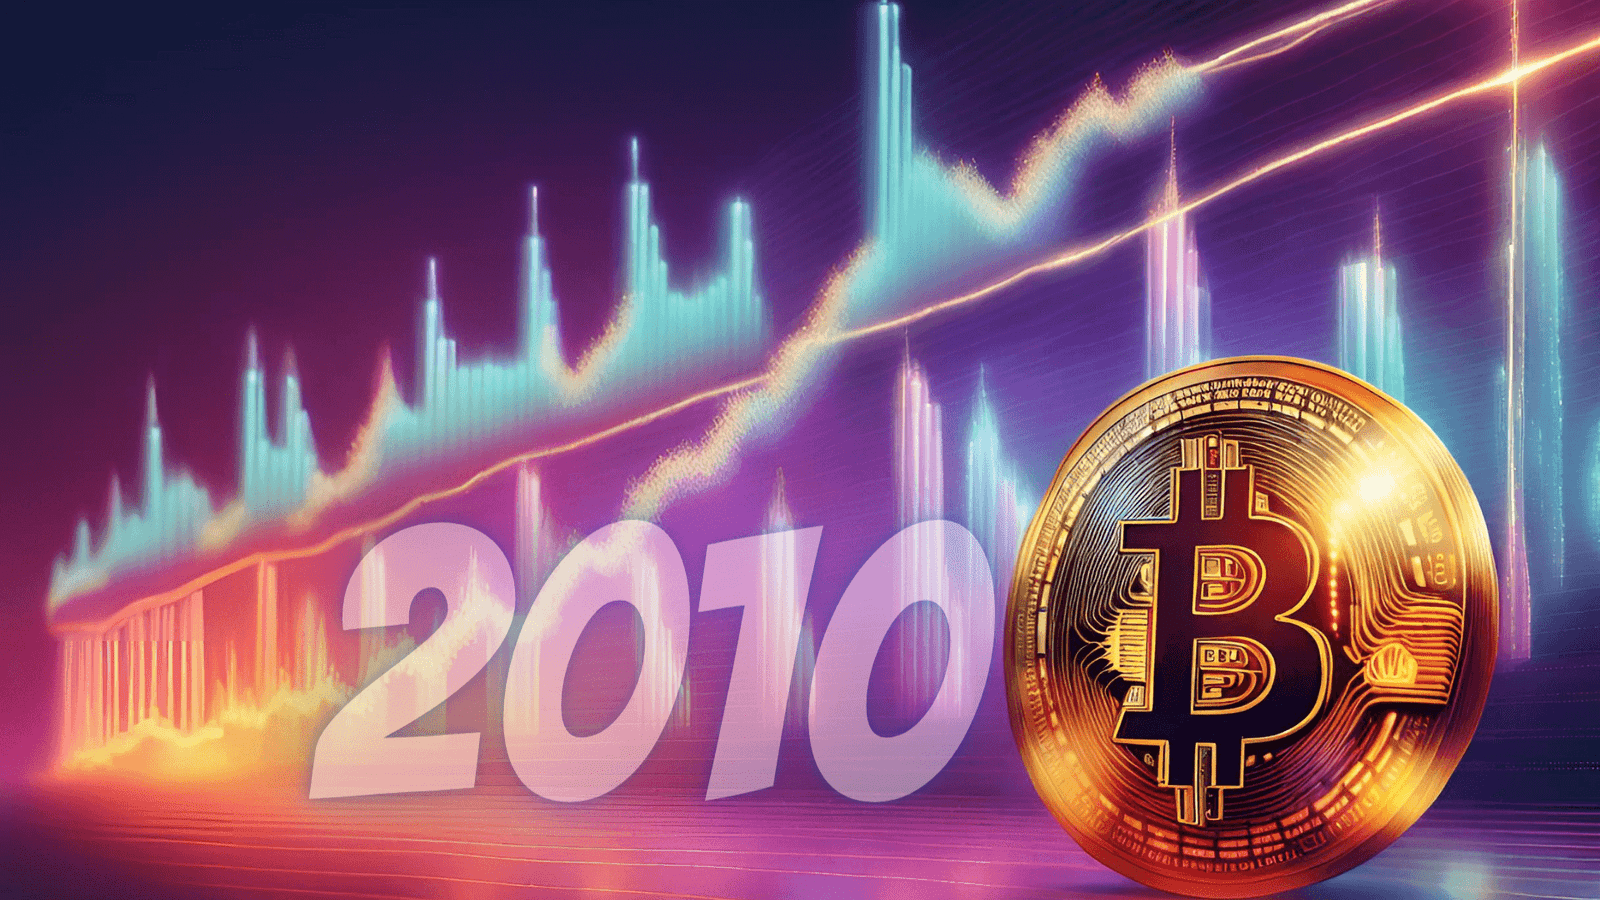 What Was the Price of Bitcoin in 2010?